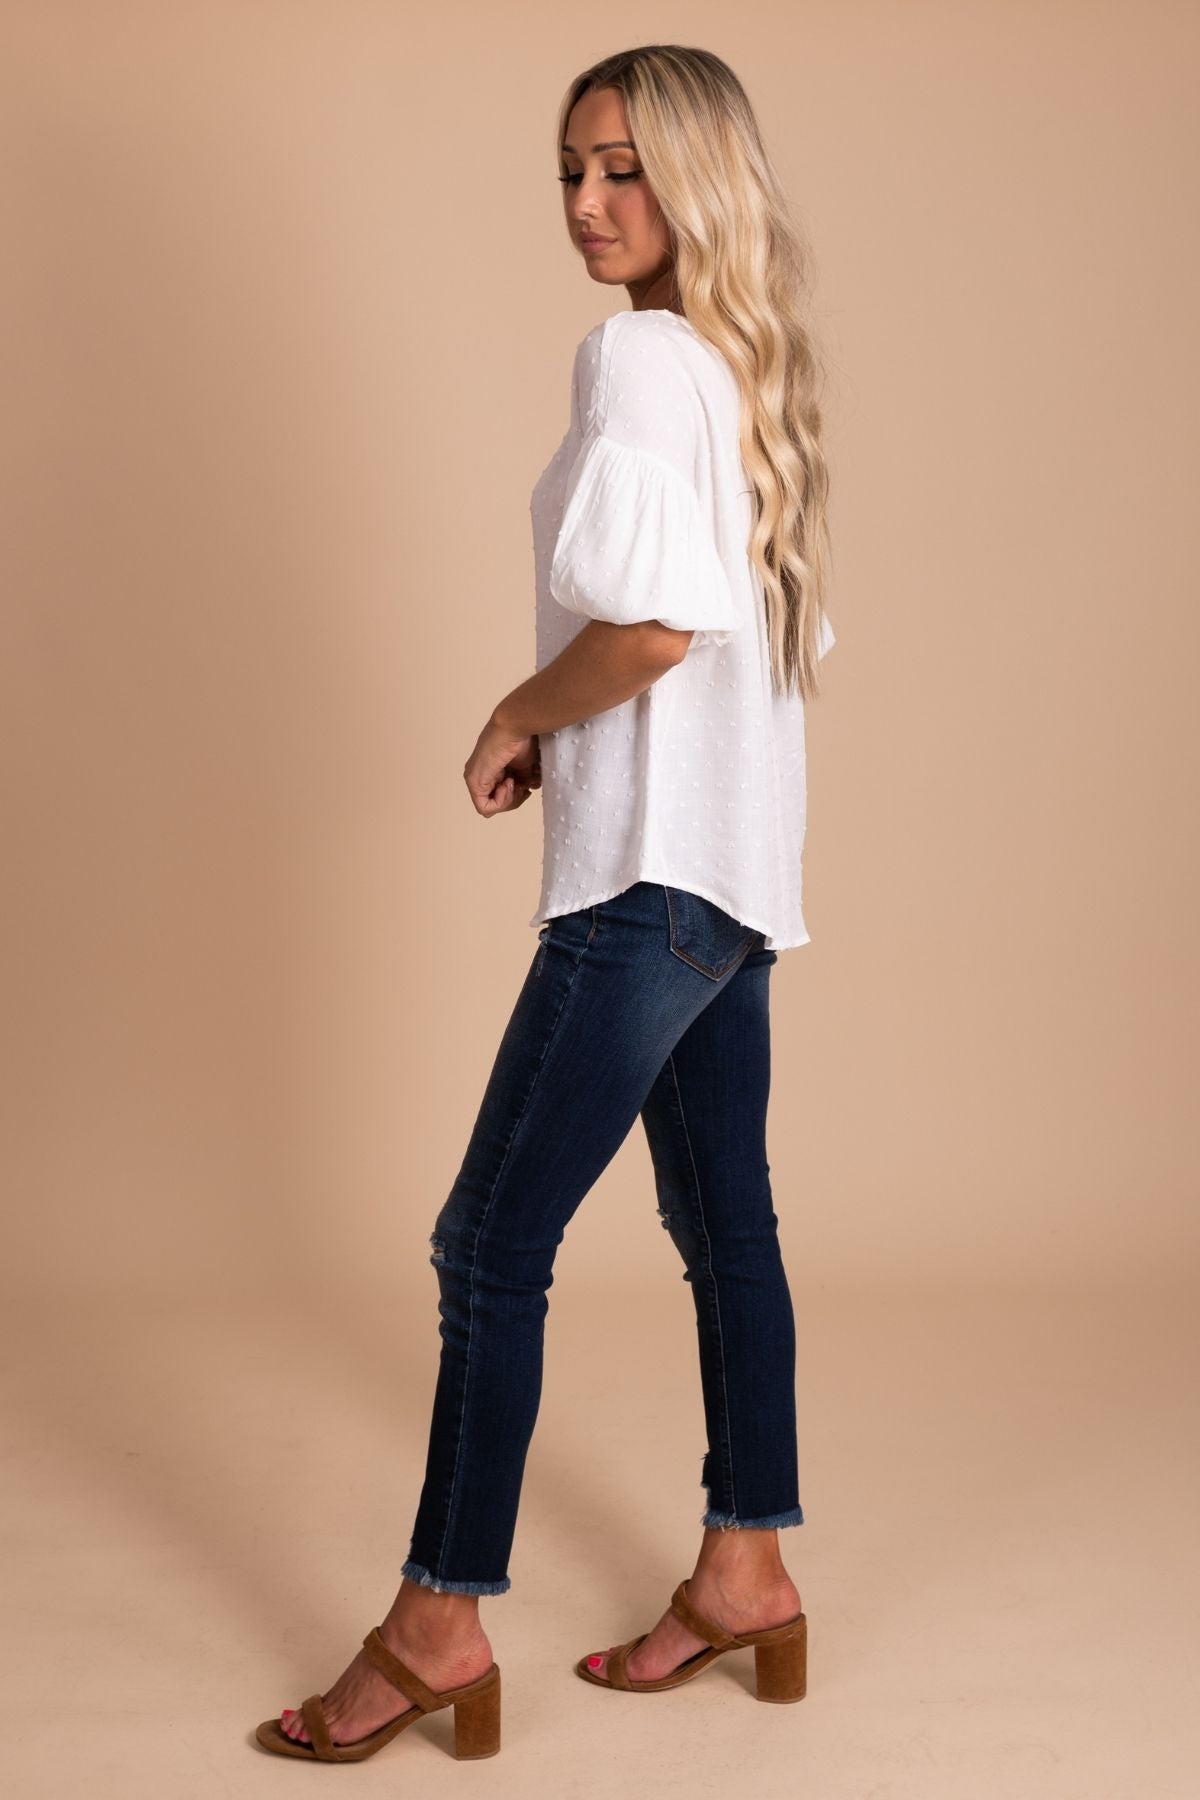 White High Quality Boutique Tops for Women